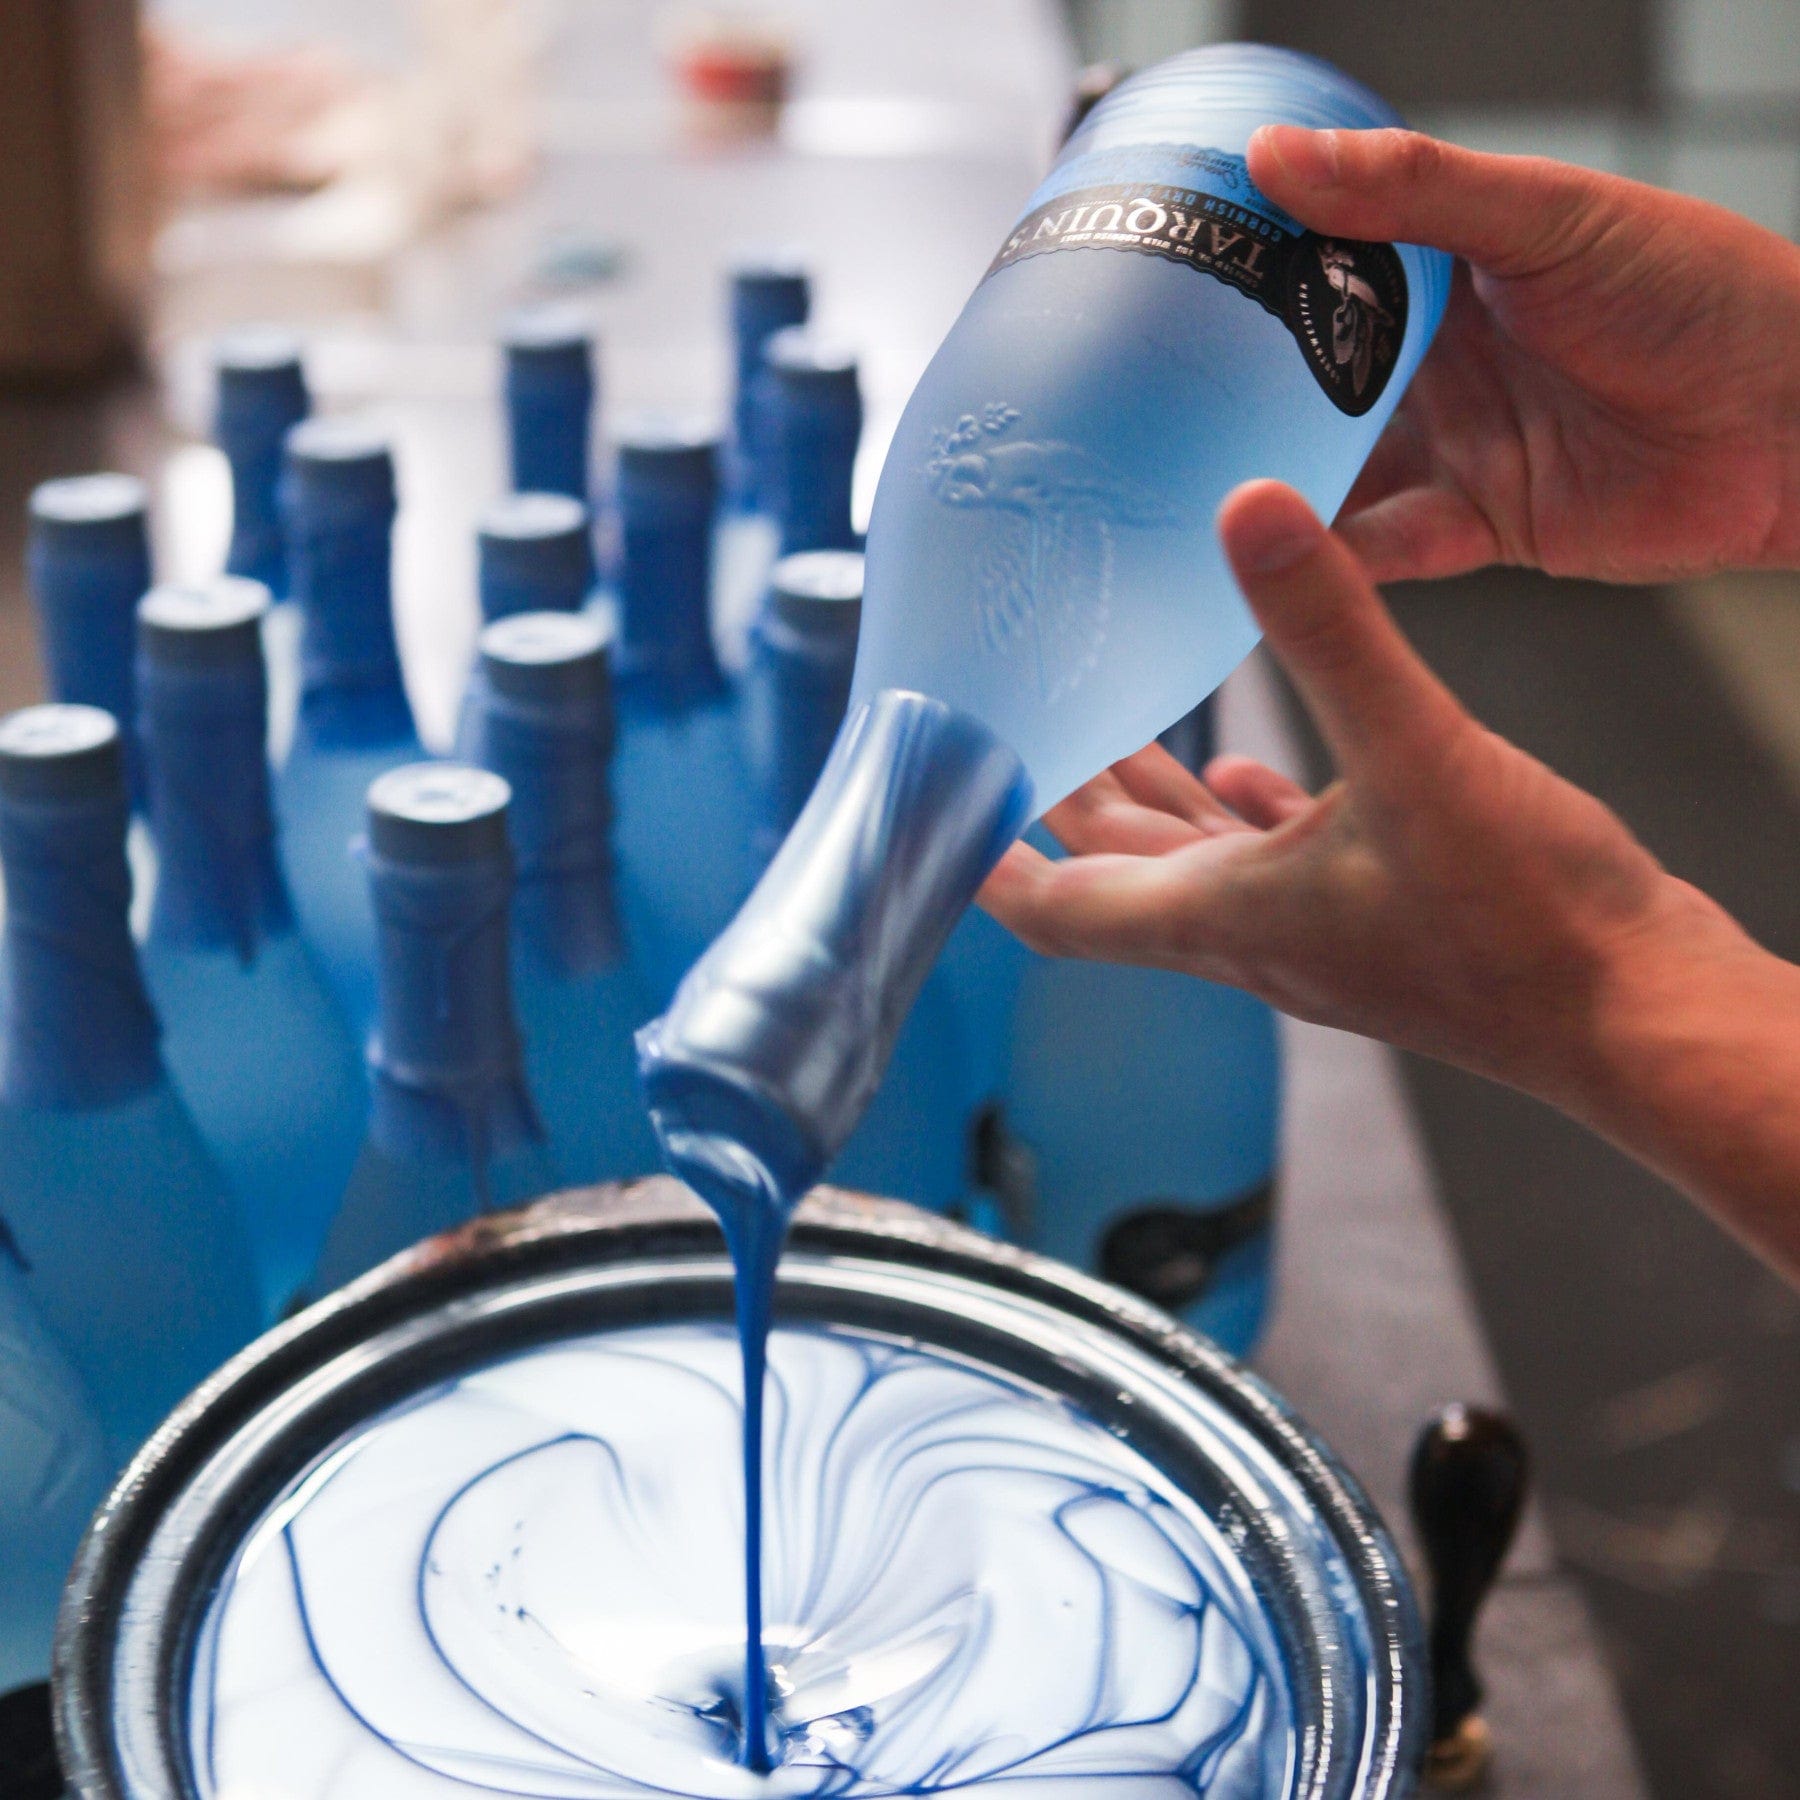 Hand pouring blue paint from a bottle into a bucket with swirling paint pattern, with blurred blue bottles in the background.